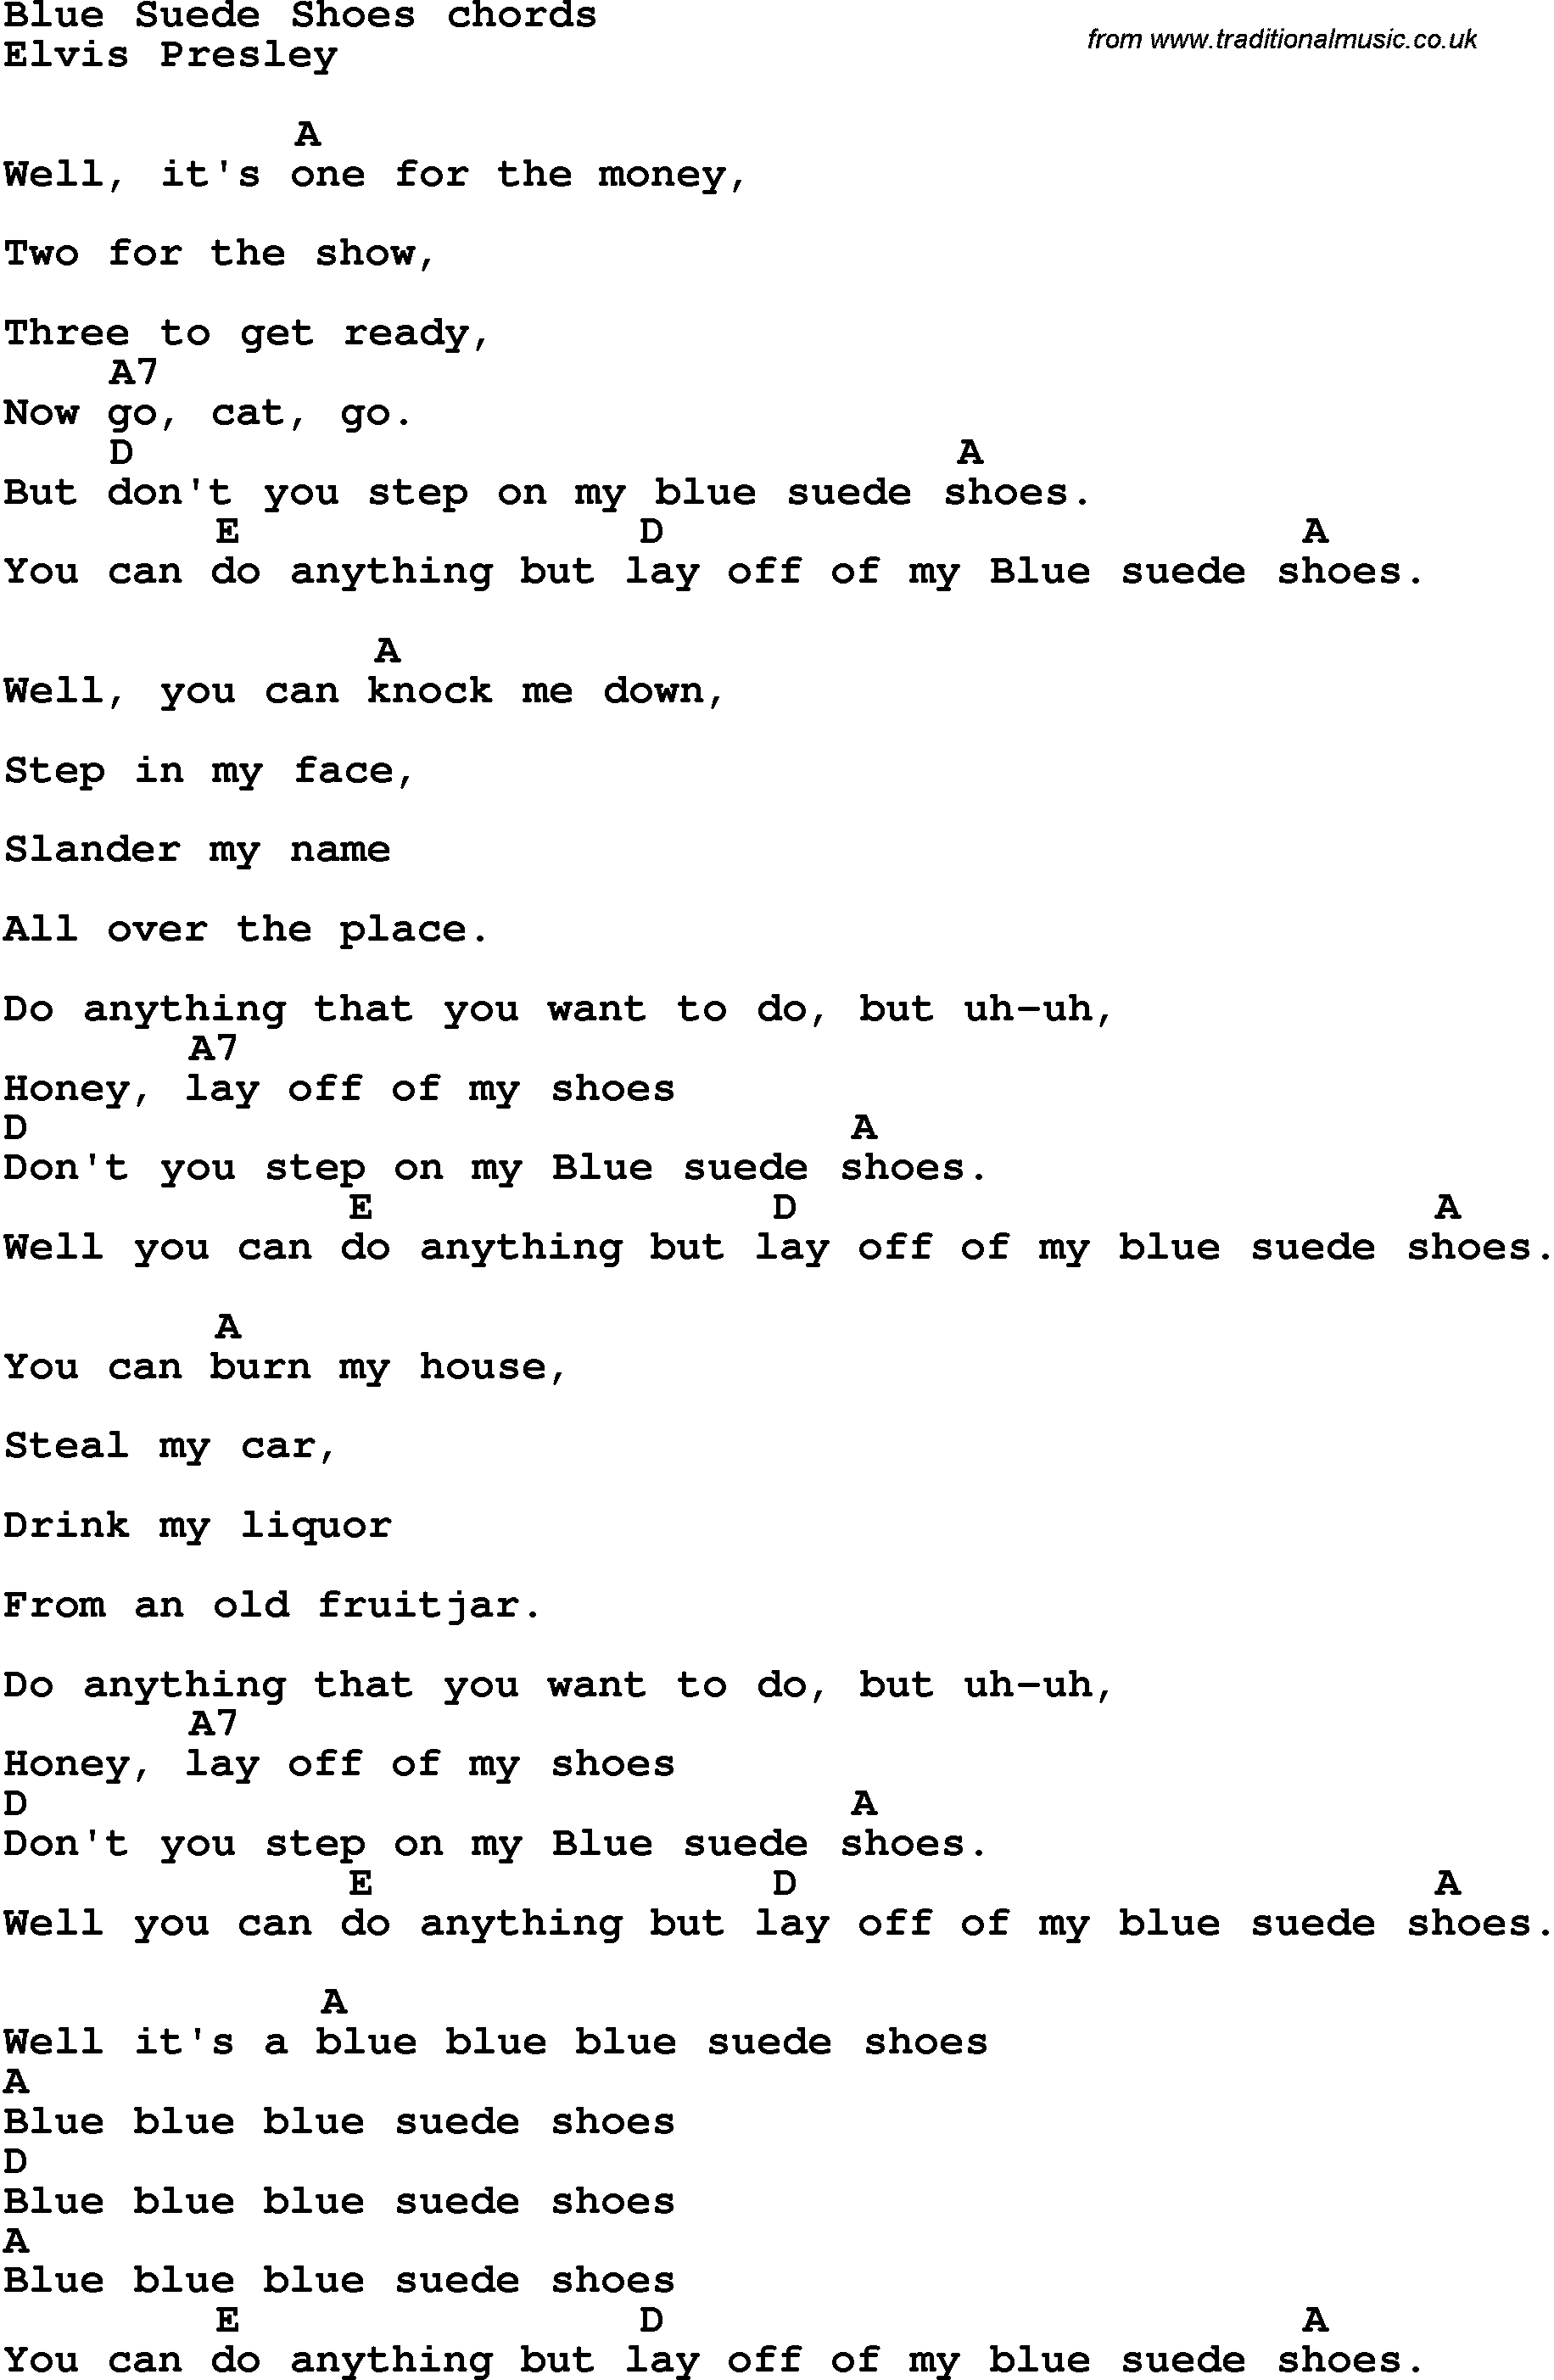 Song Lyrics with guitar chords for Blue Suede Shoes